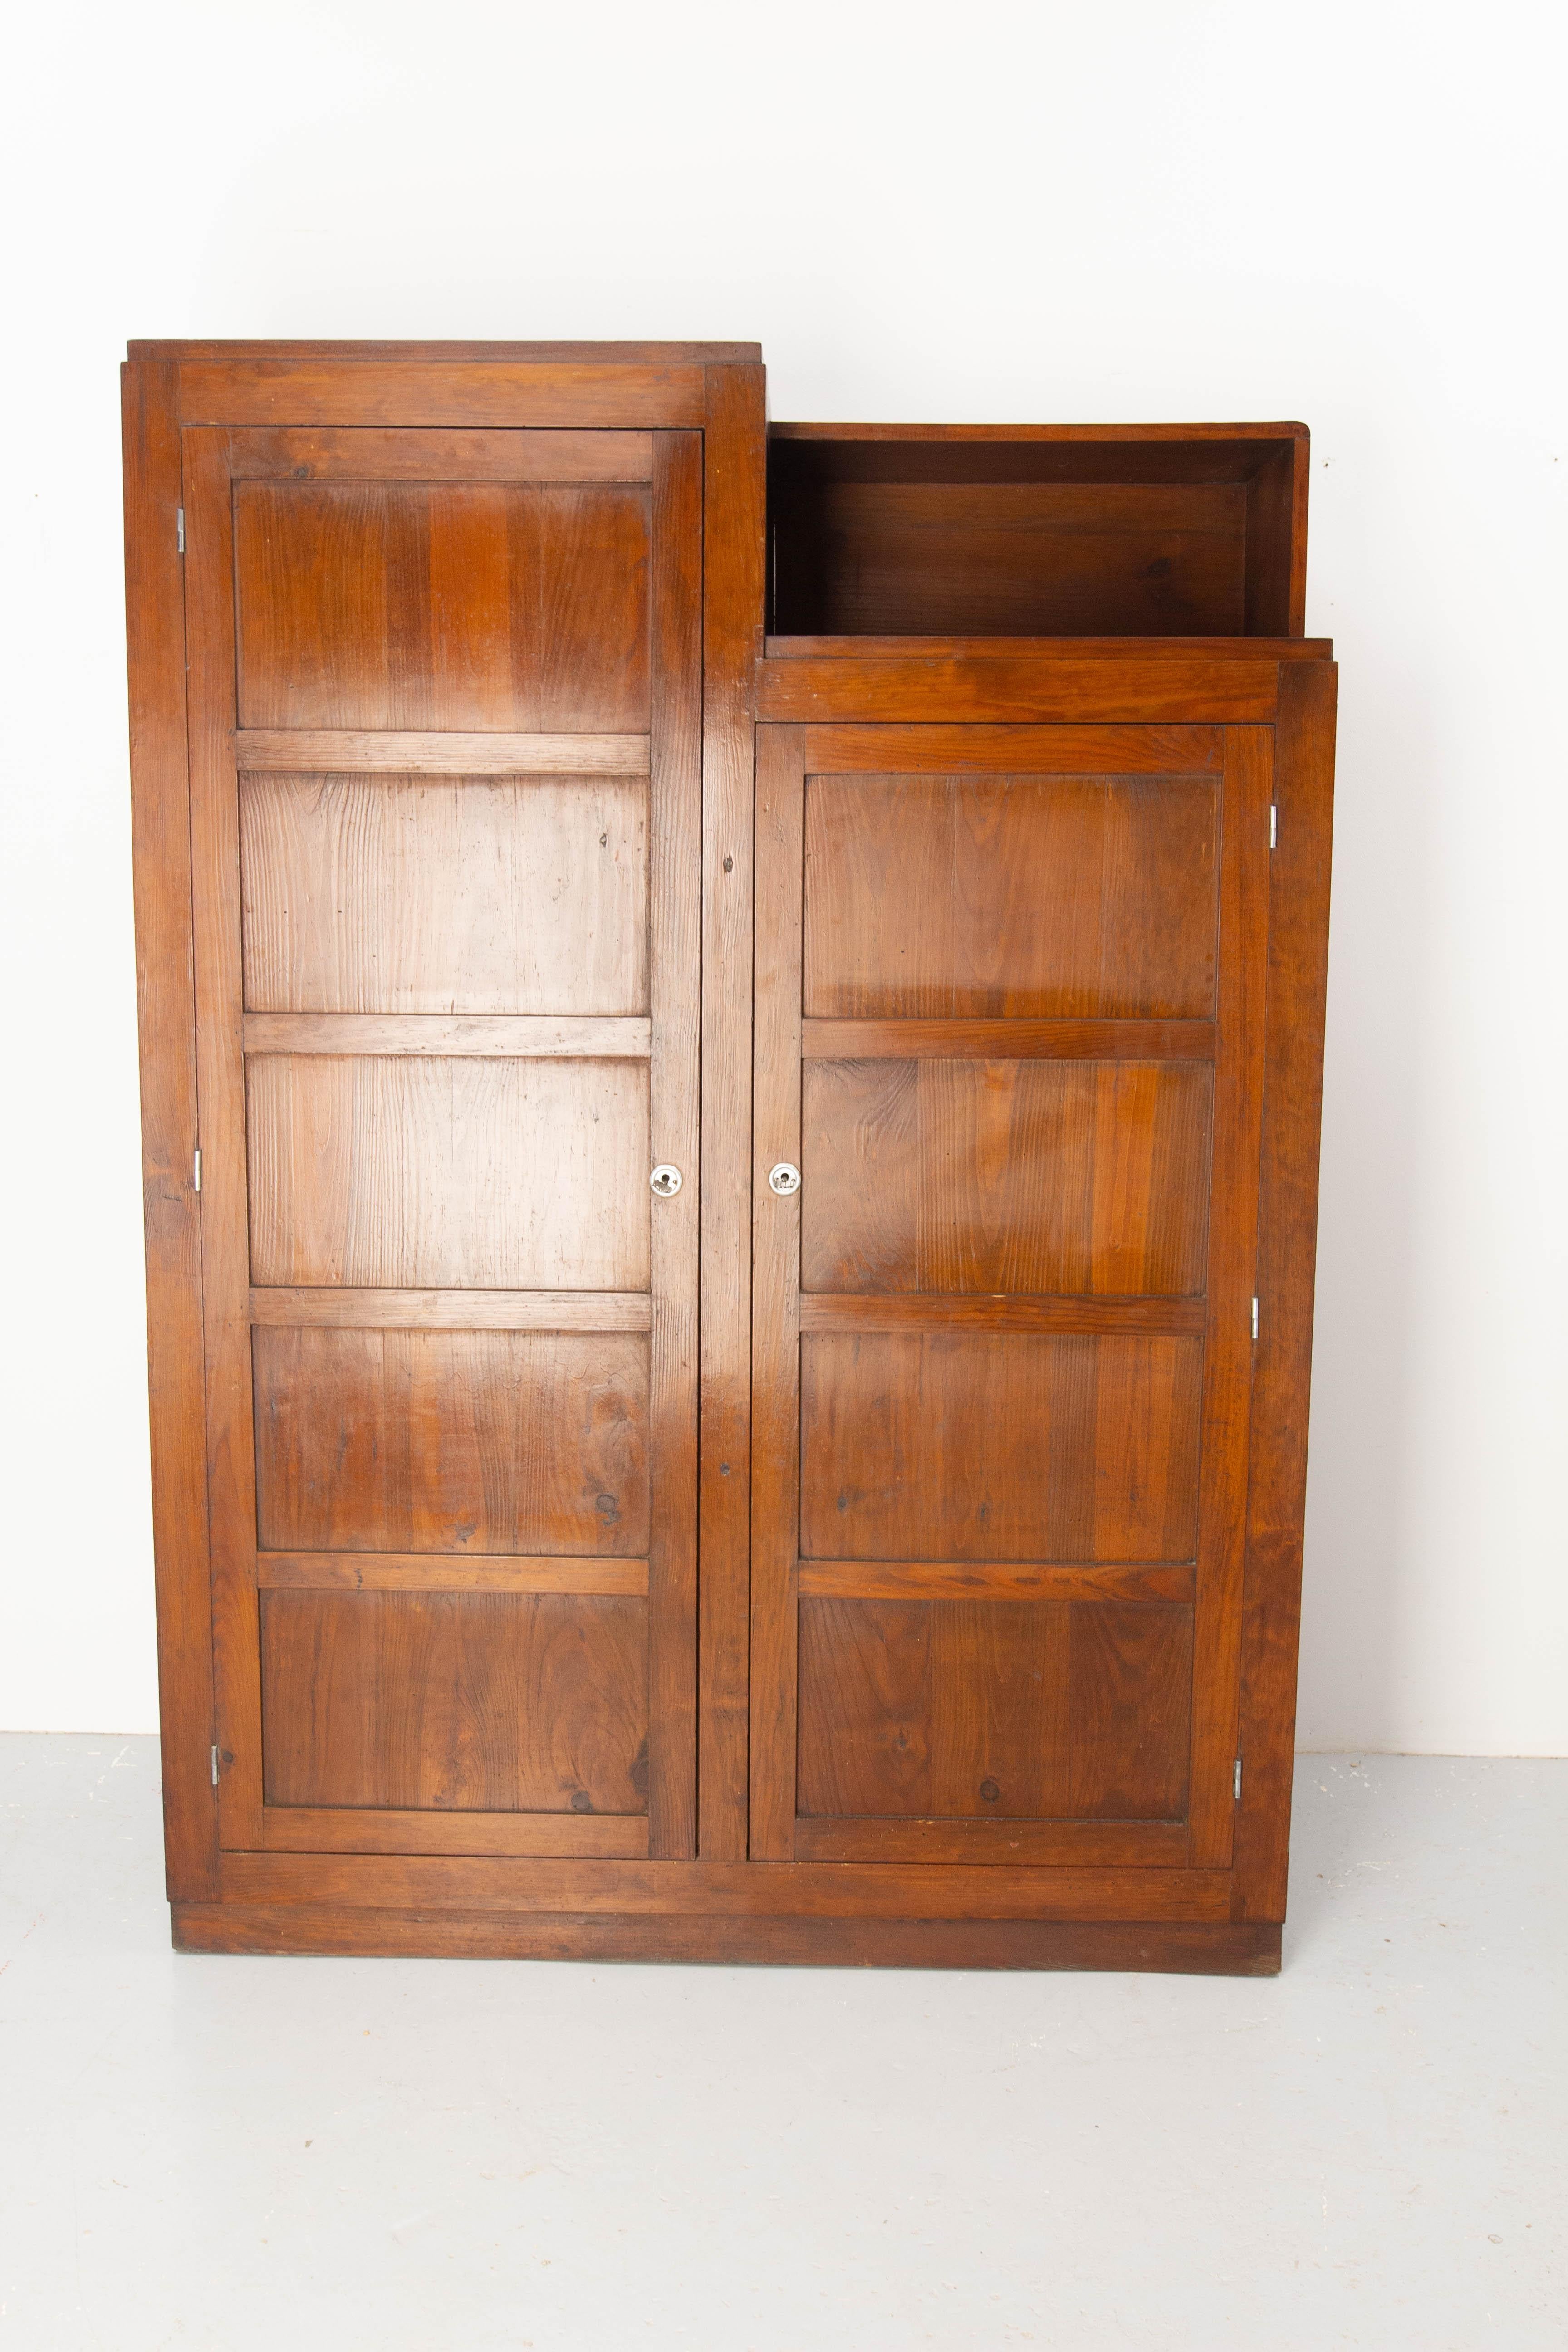 French asymmetrical armoire with wardrobe, shelves and drawers.
A little part on the top of the left part can be used has an exhibition shelf.
A metal rod to complete the wardrobe part will be added before sending.
Few signs of use, good